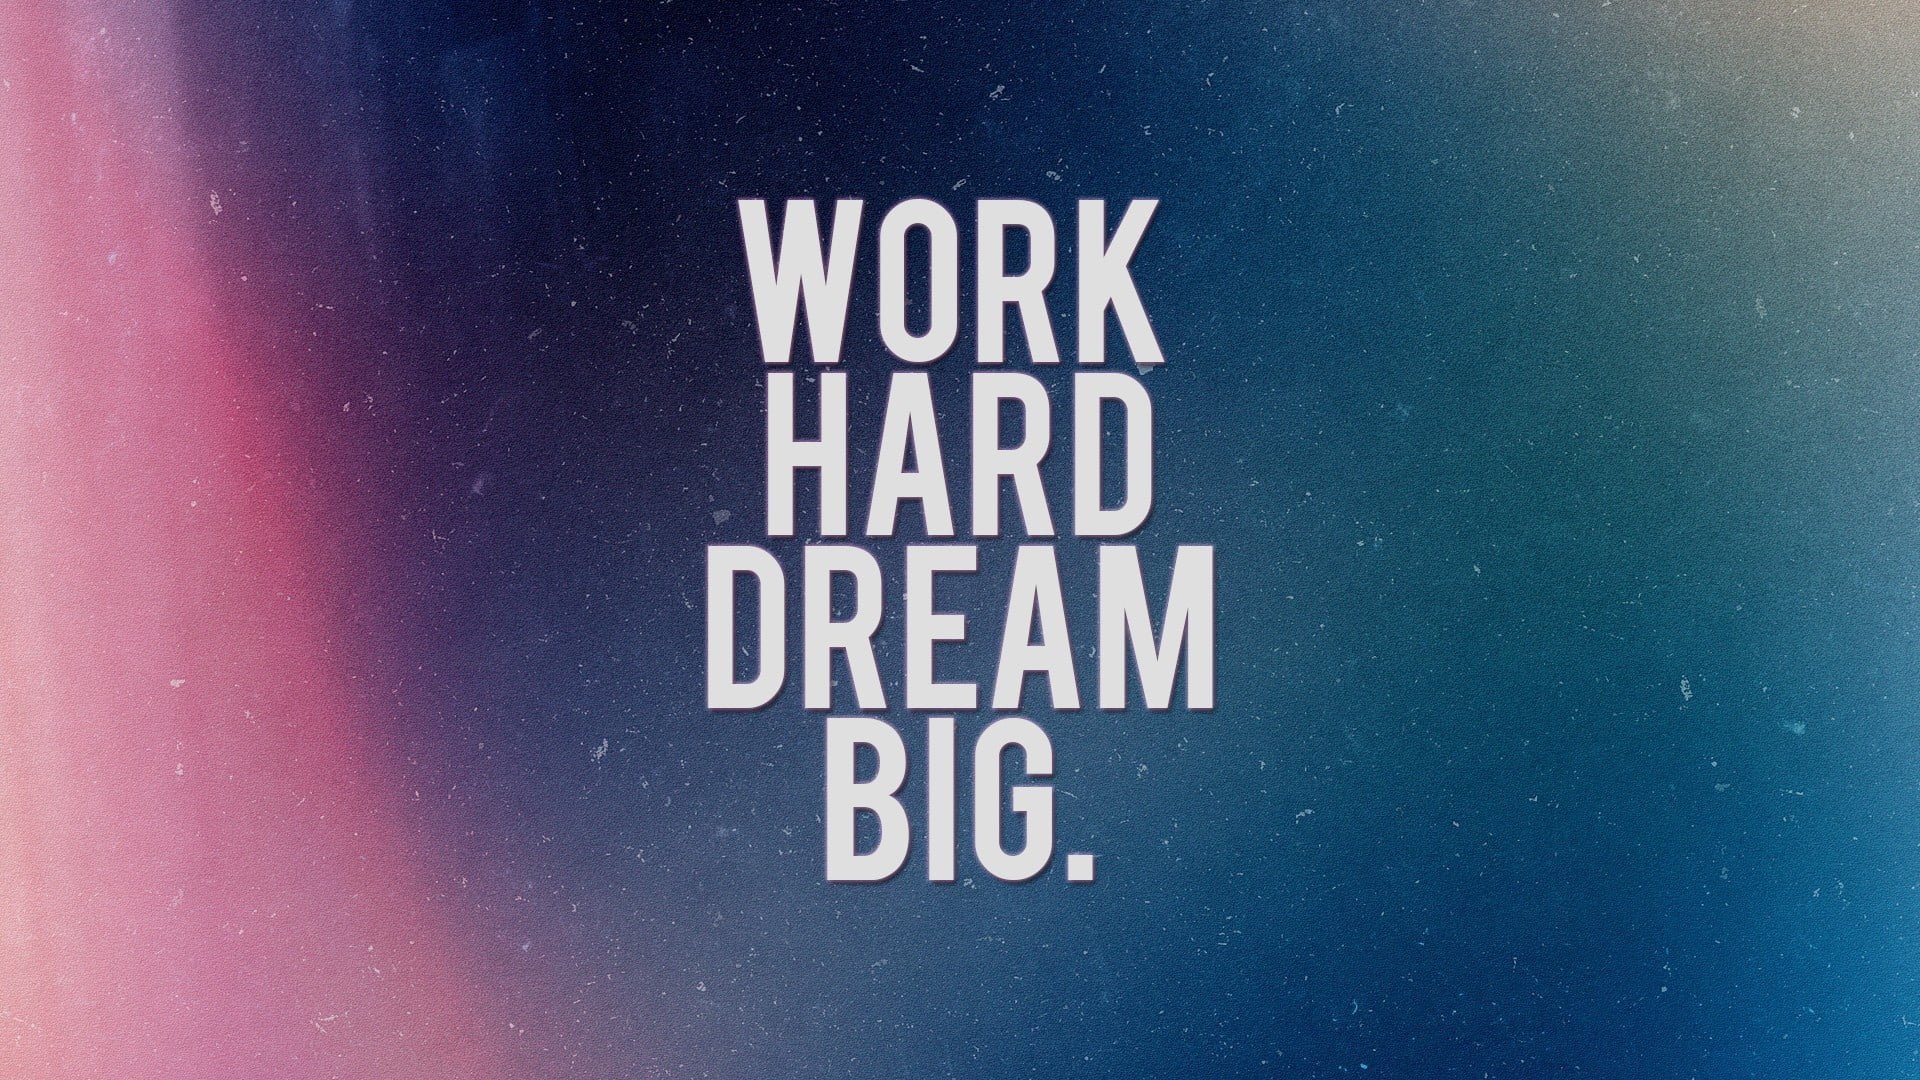 work hard dream big. text, quote, typography, inspirational, motivational